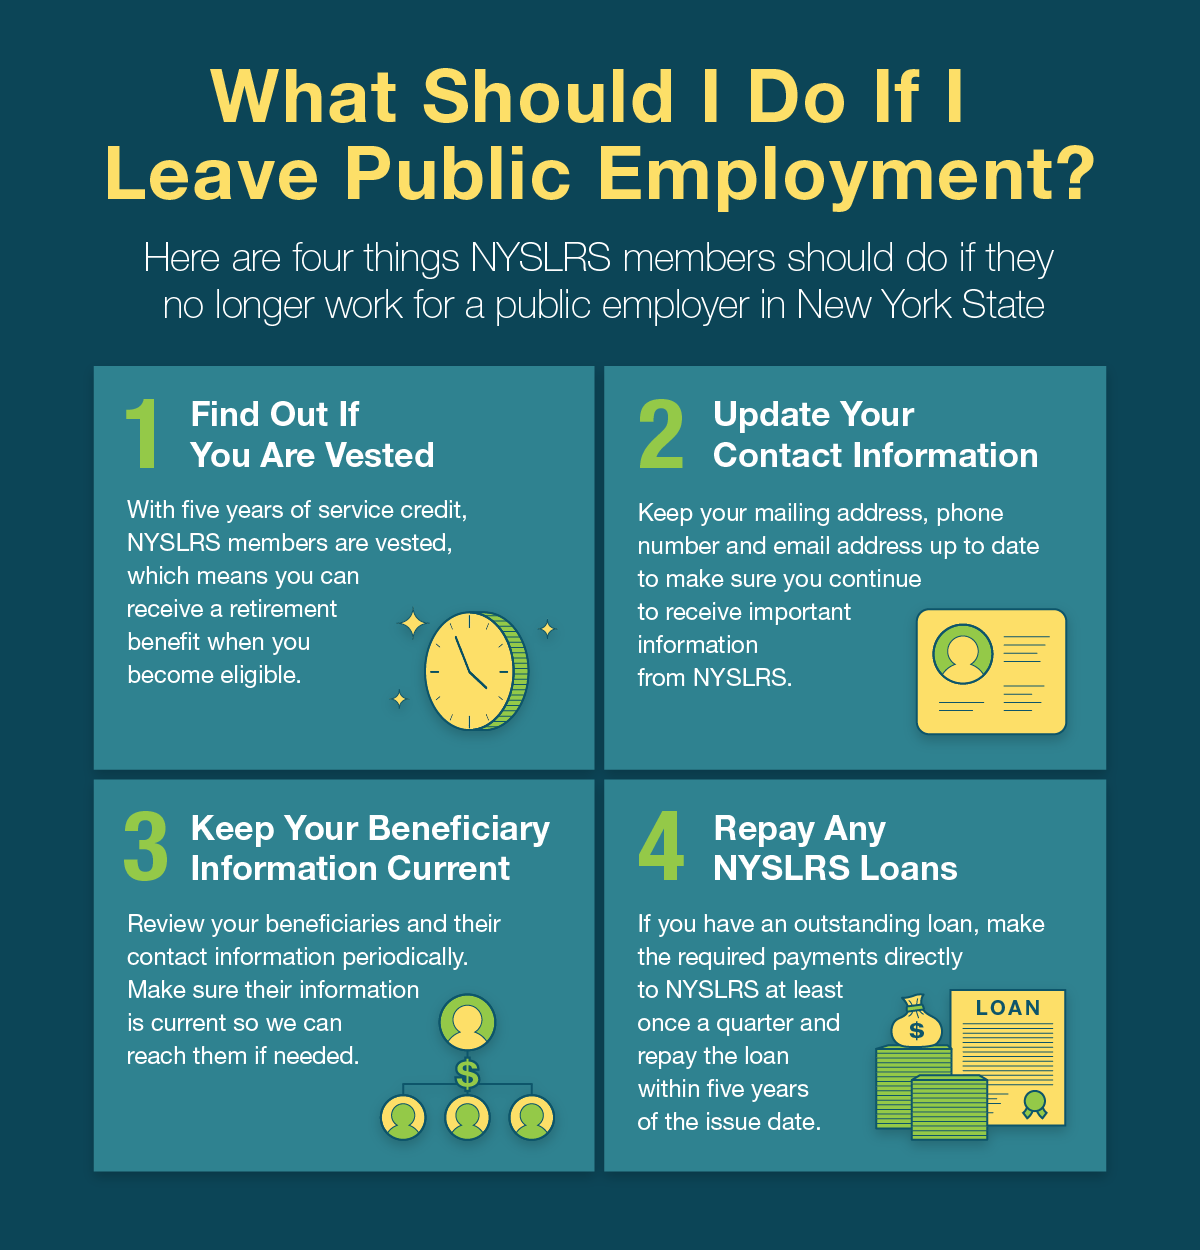 What Should I Do if I Leave Public Employment